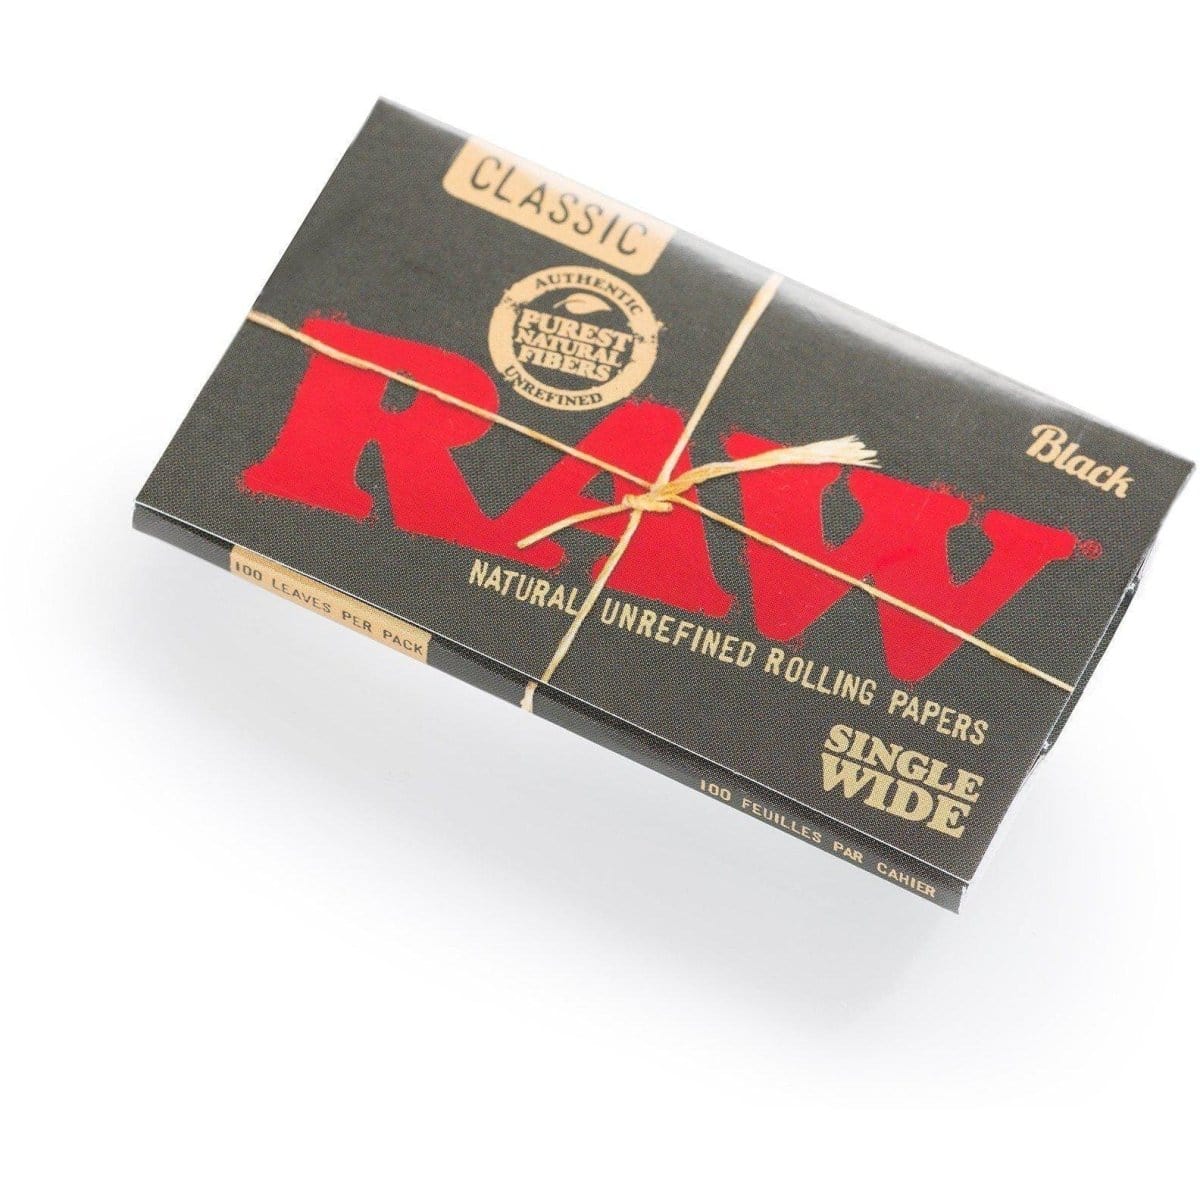 HBI Papers RAW Black Single Wide Rolling Papers